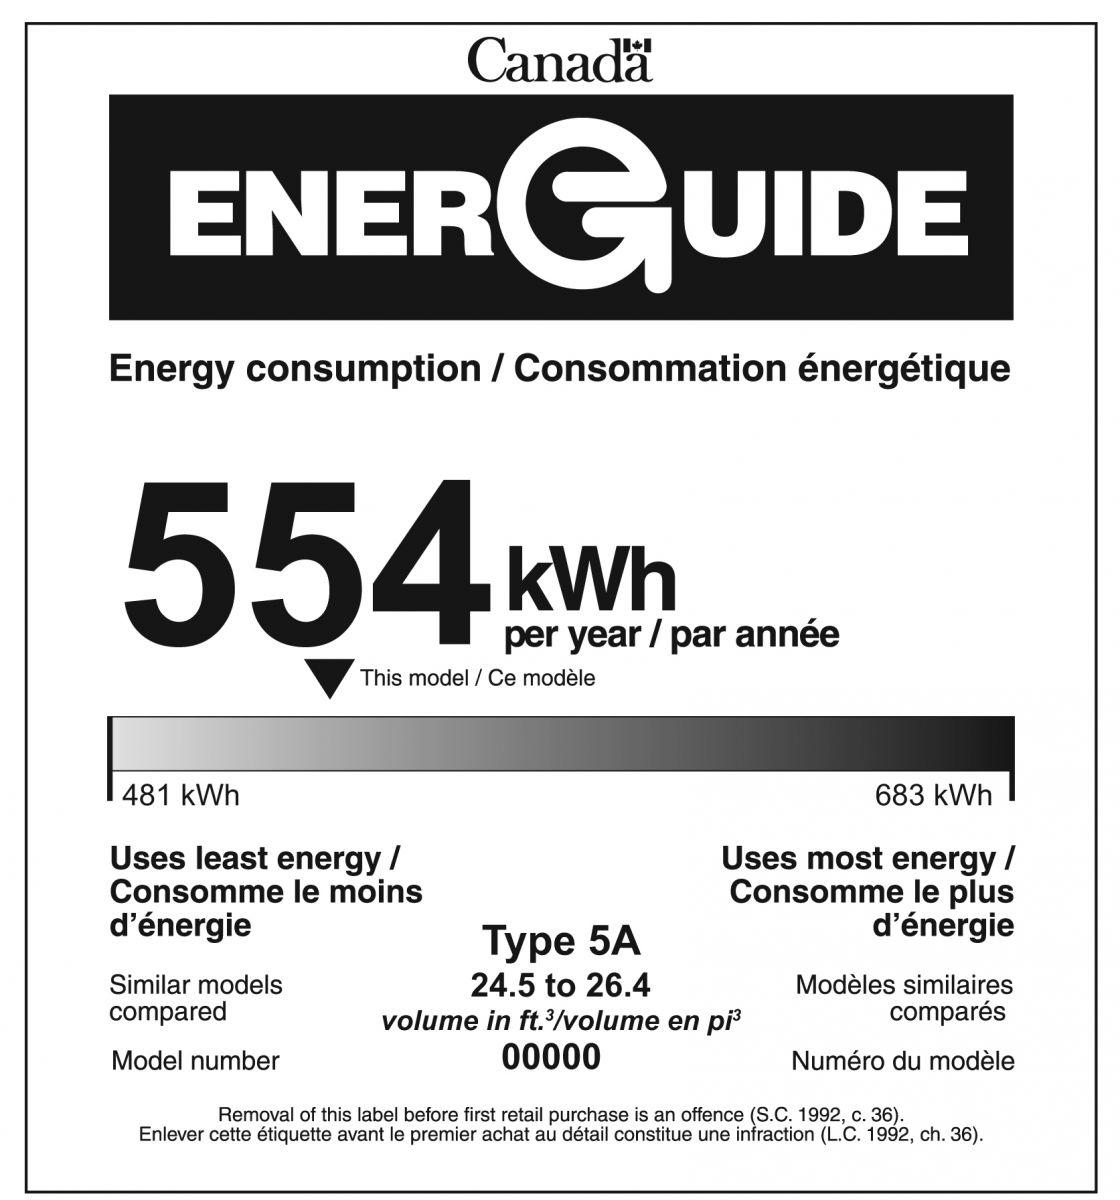 Example of an EnerGuide label for a refrigerator